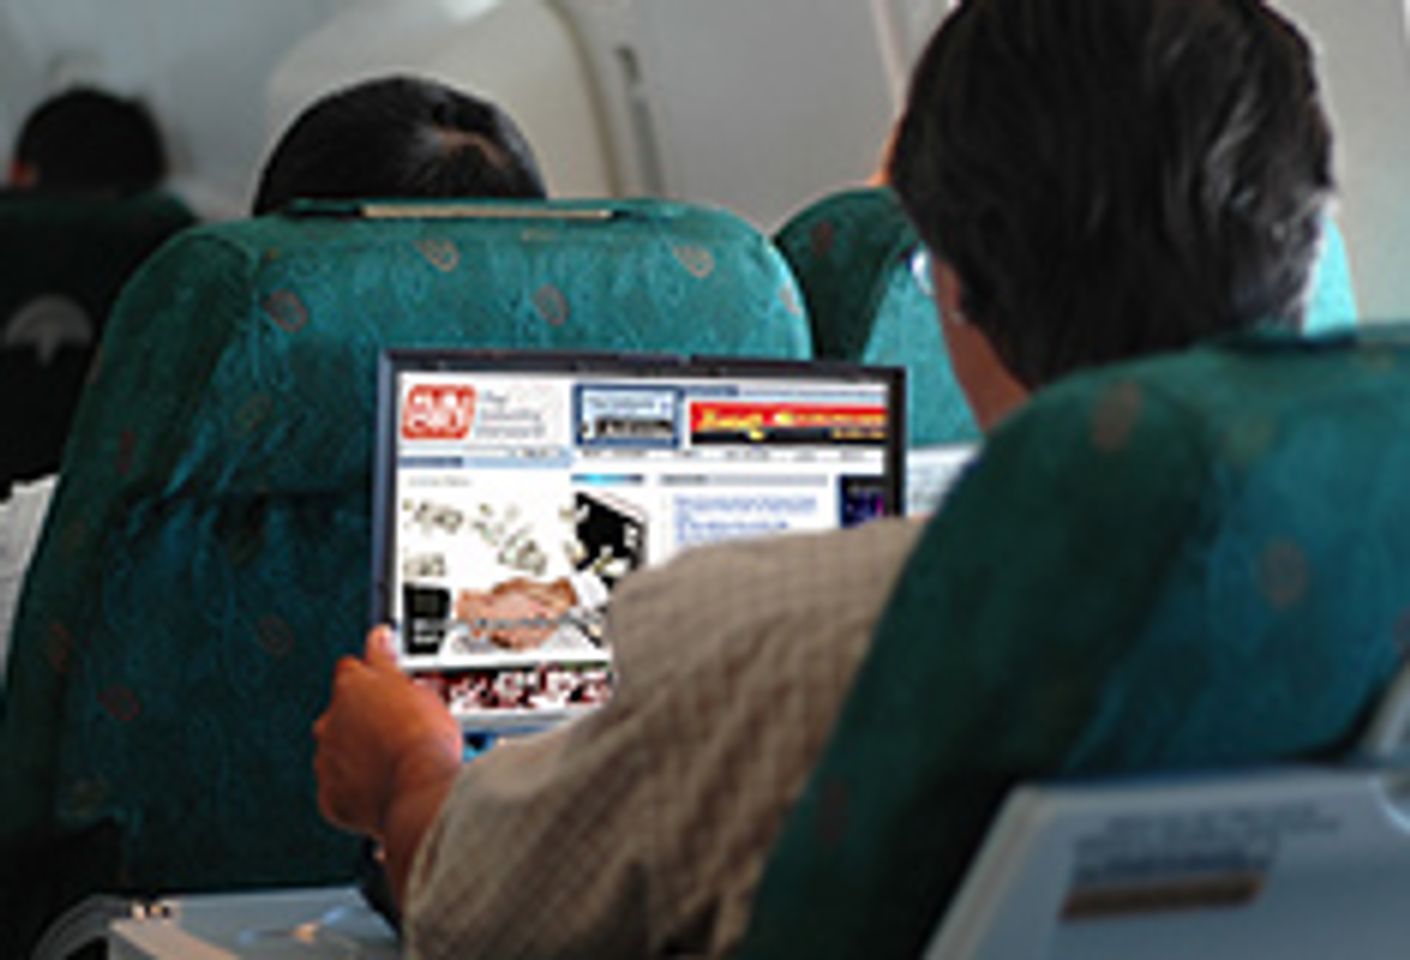 Airlines Discuss In-Flight Internet Restrictions